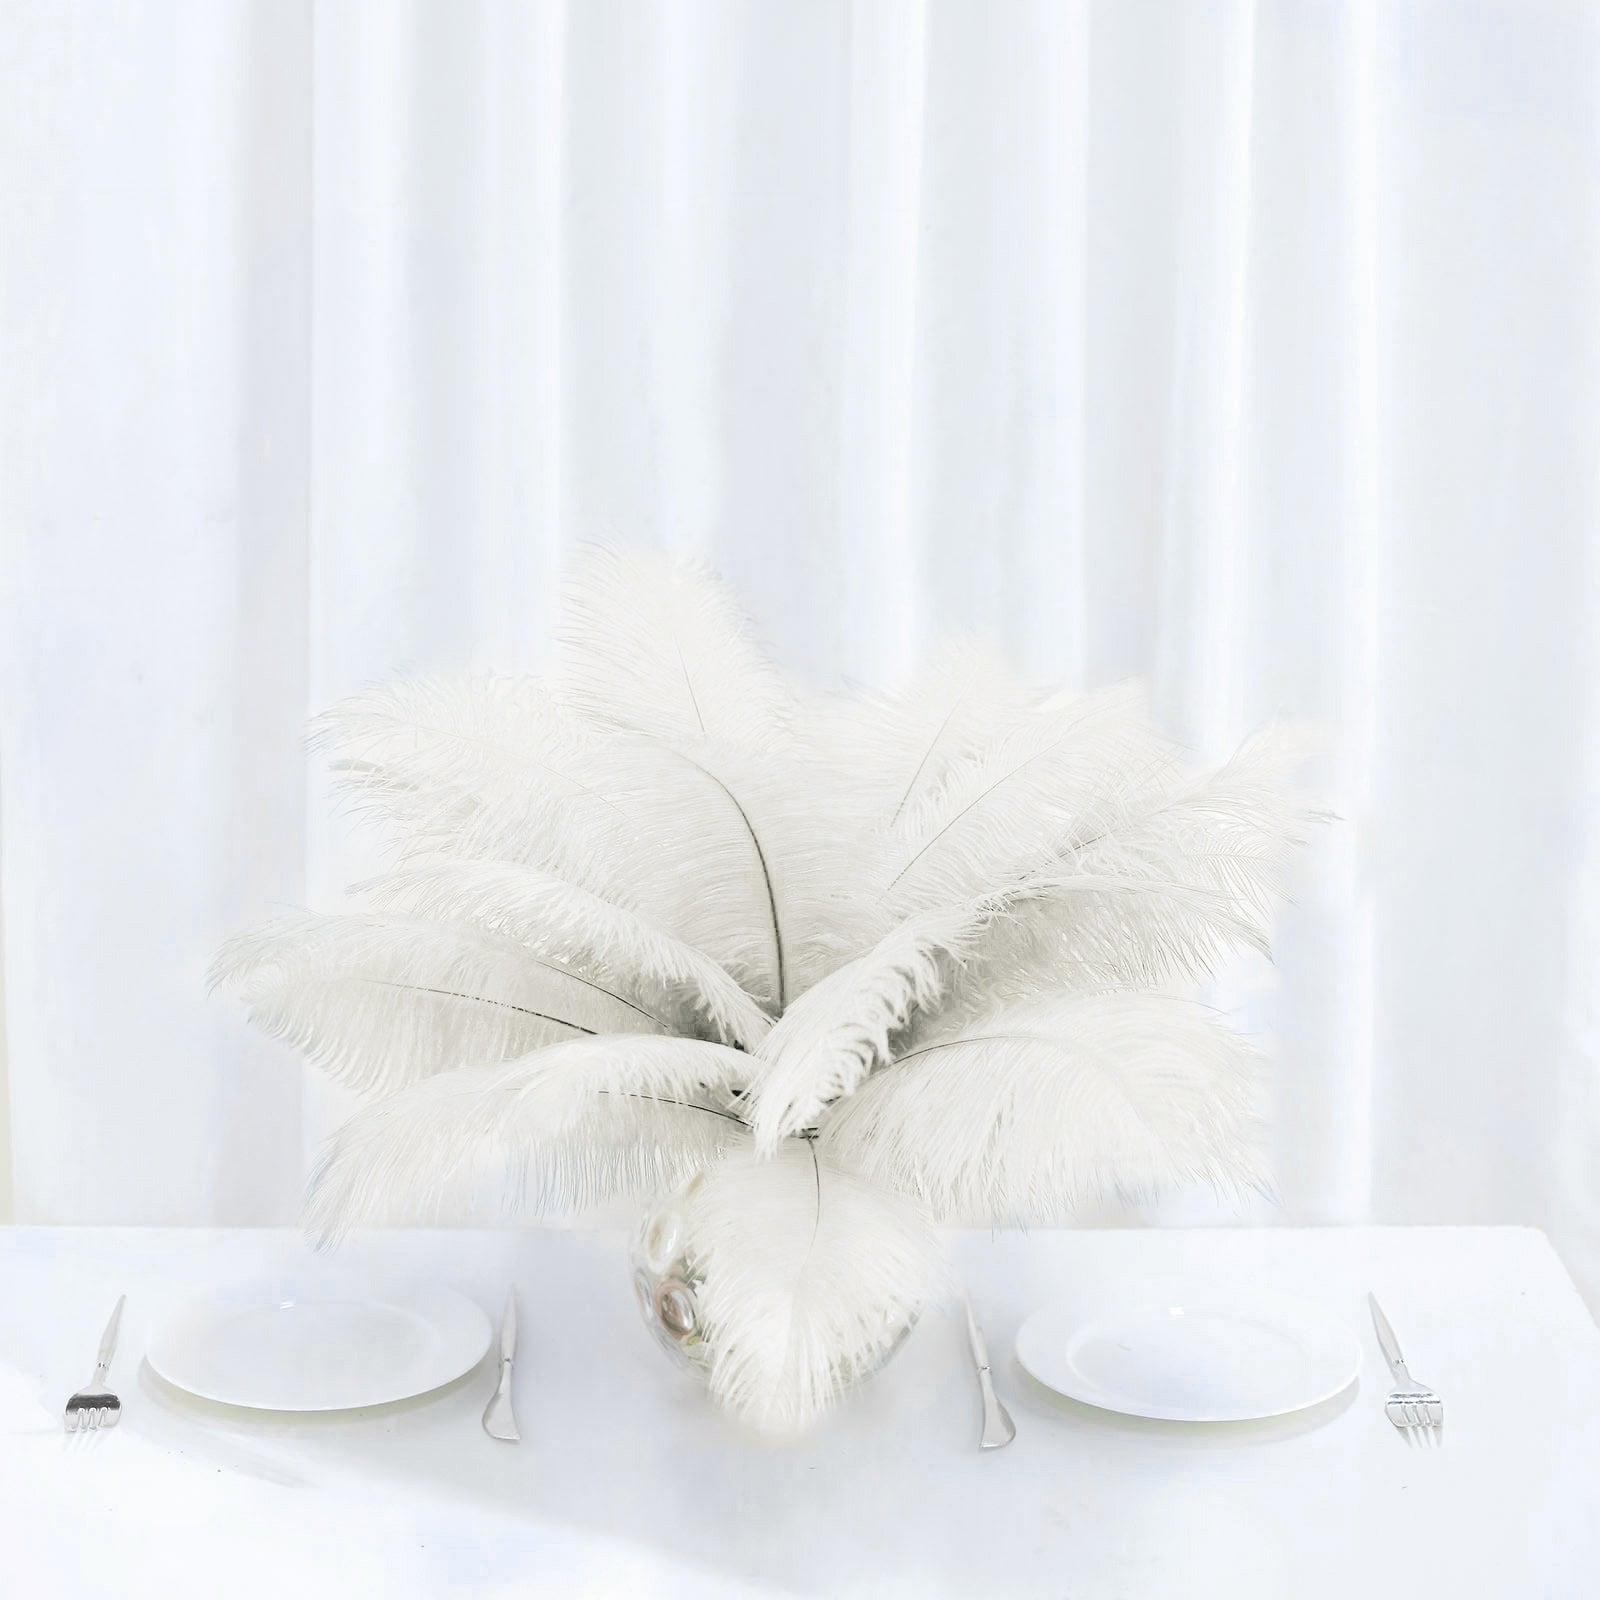 AWAYTR 10pcs Natural Ostrich Feathers for Wedding Centerpieces Home Decoration (12-14 inch, White)